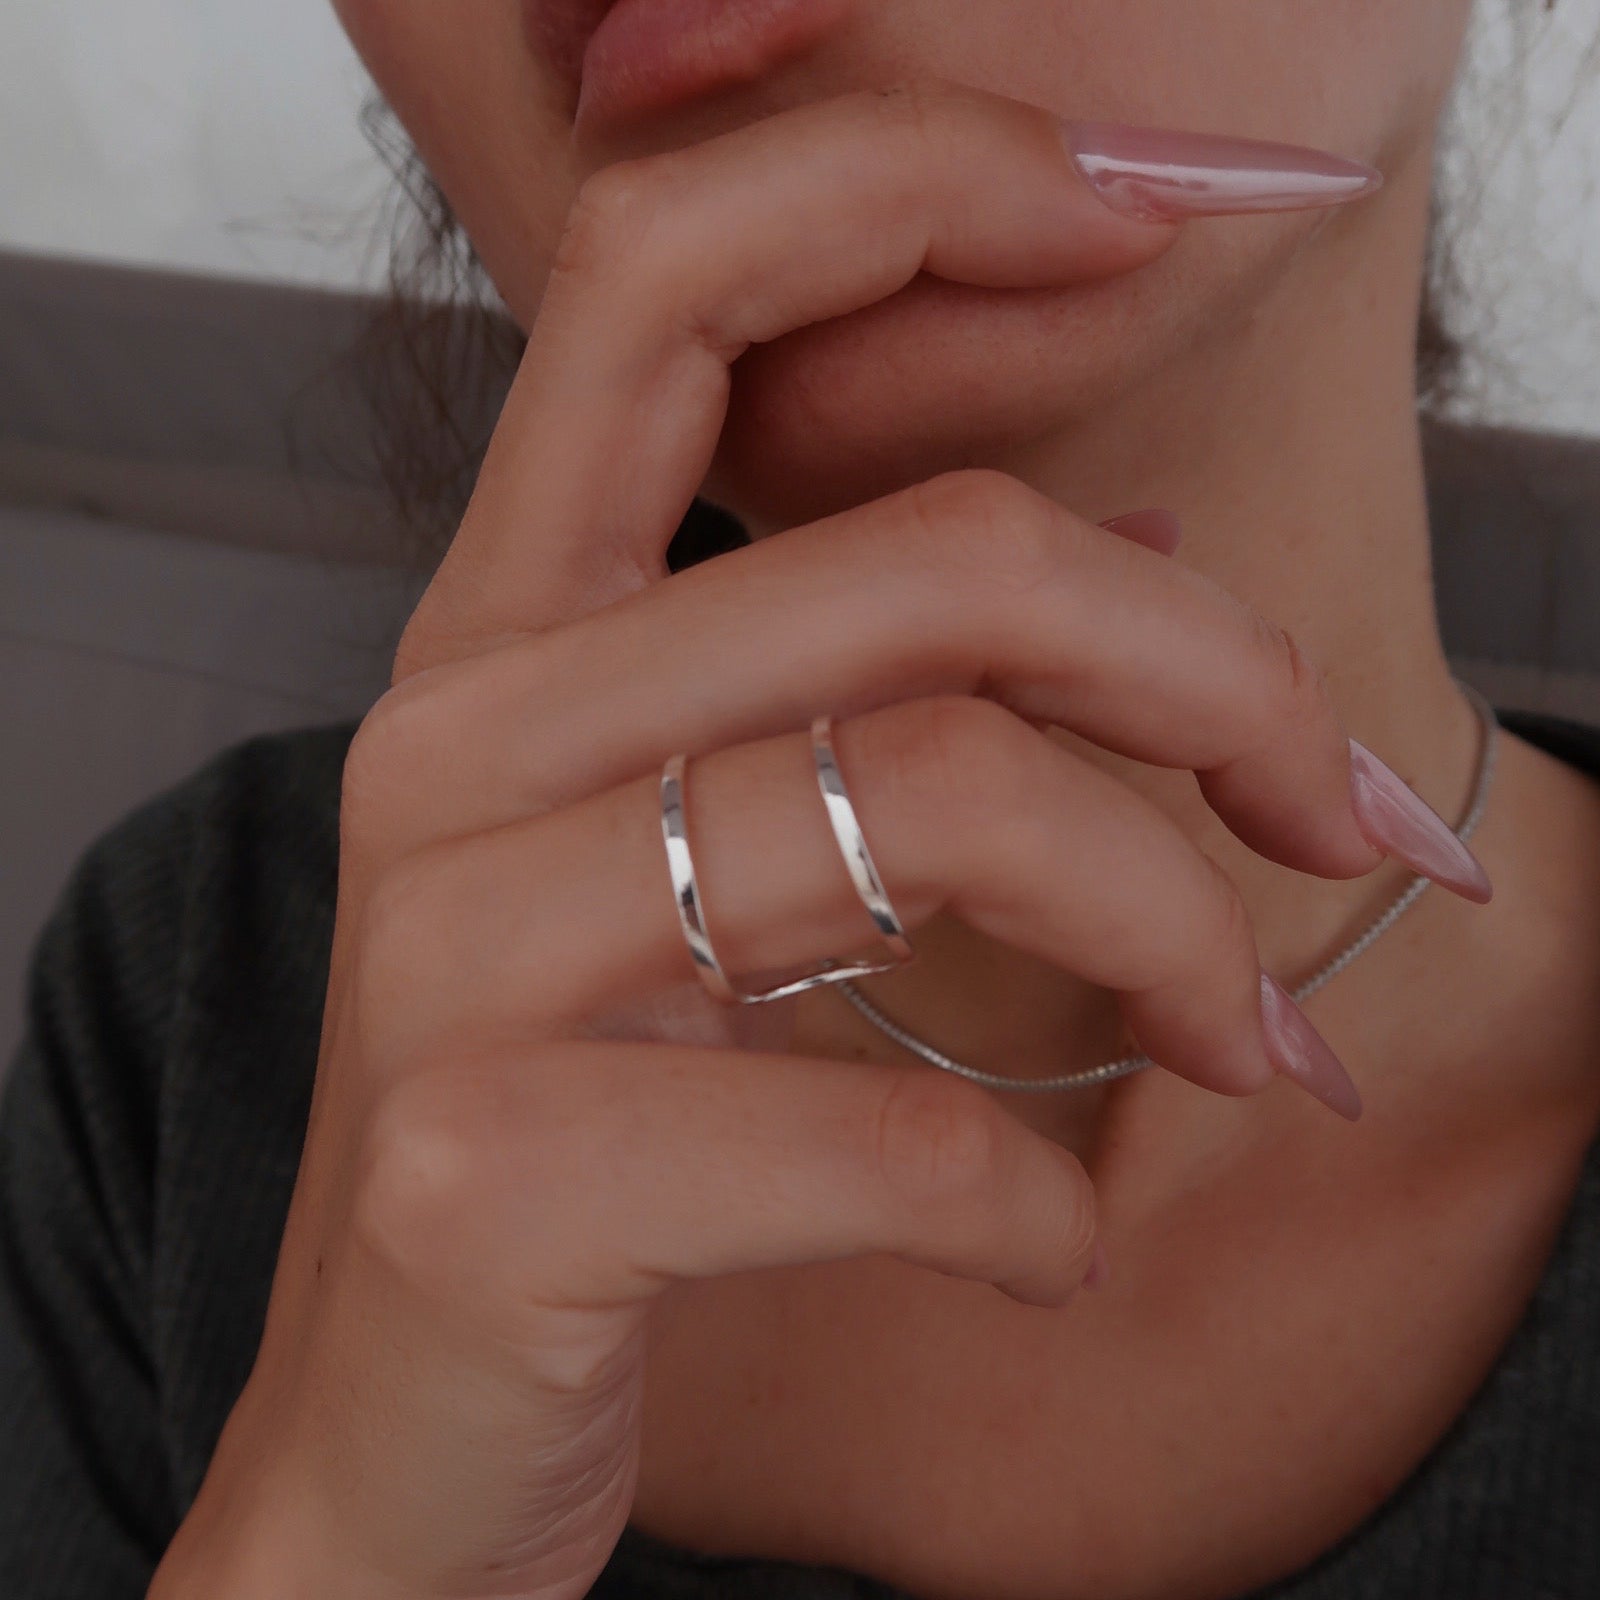 INEL ARGINT 925 SUMMER TIME rings > silver ring > summer time ring > gifts for her > gifts for girls > gifts for moms > gifts for best friend > birthday gift > minimalist ring Maison la Stephanie   